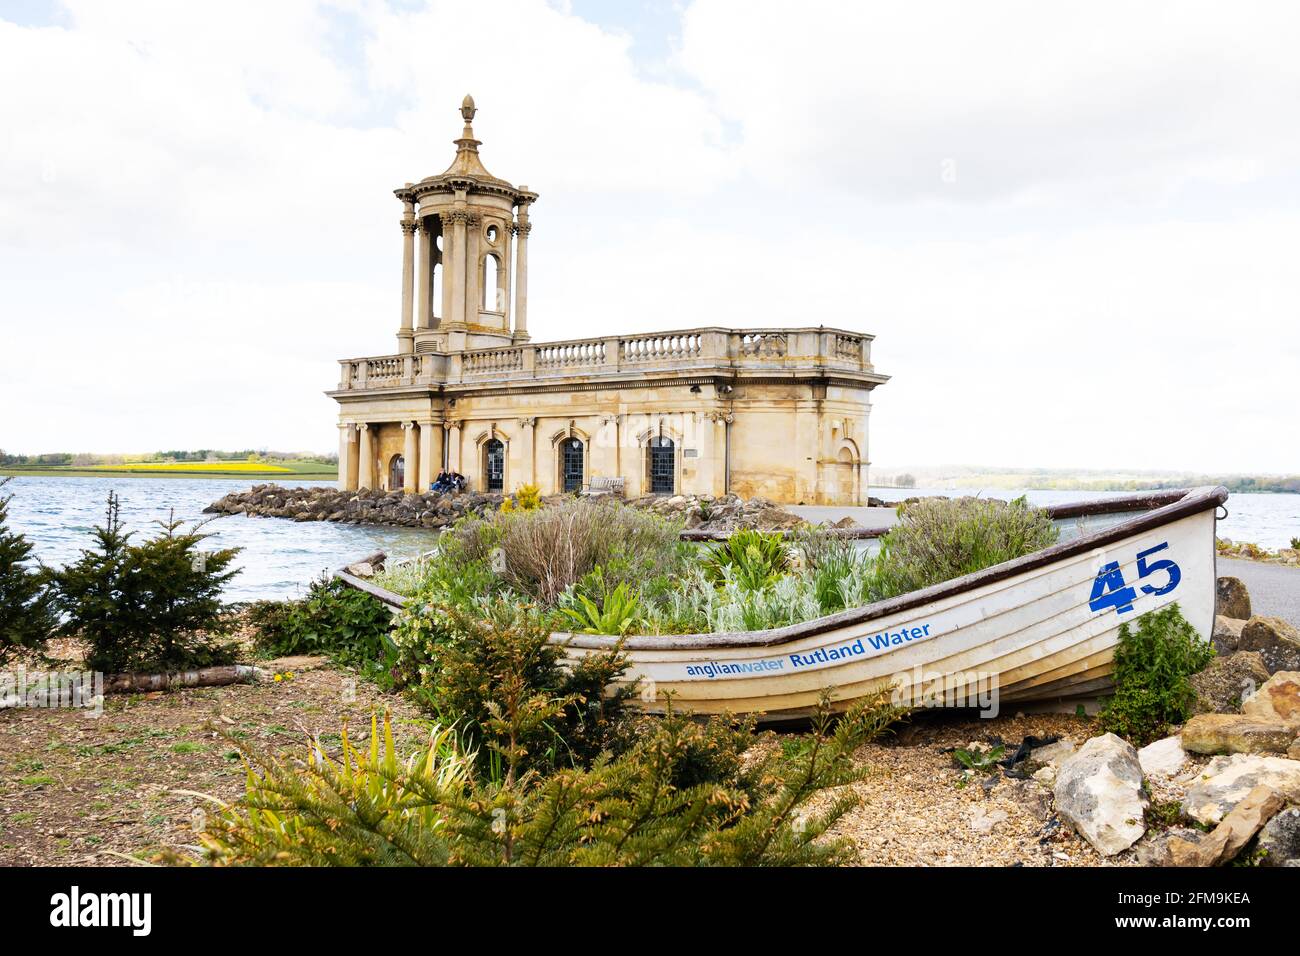 Decorative old hire boat, Normanton Church, Rutland Water, Oakham, Rutland, England. Anglian Water reservoir, constructed in 1970. Stock Photo